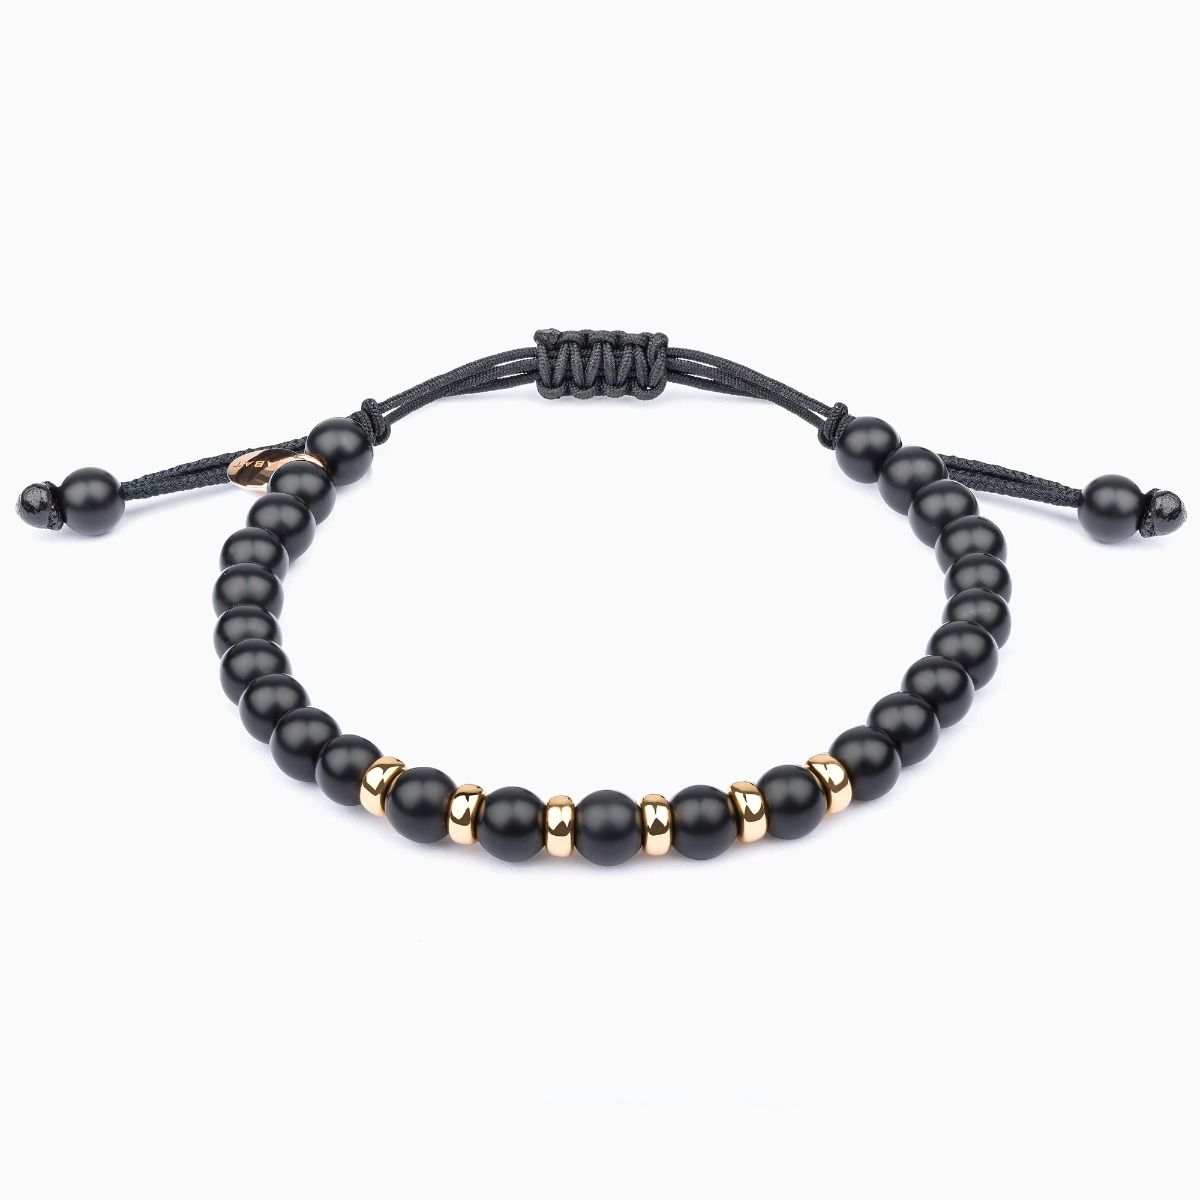 String bracelet with golden and onyx beads